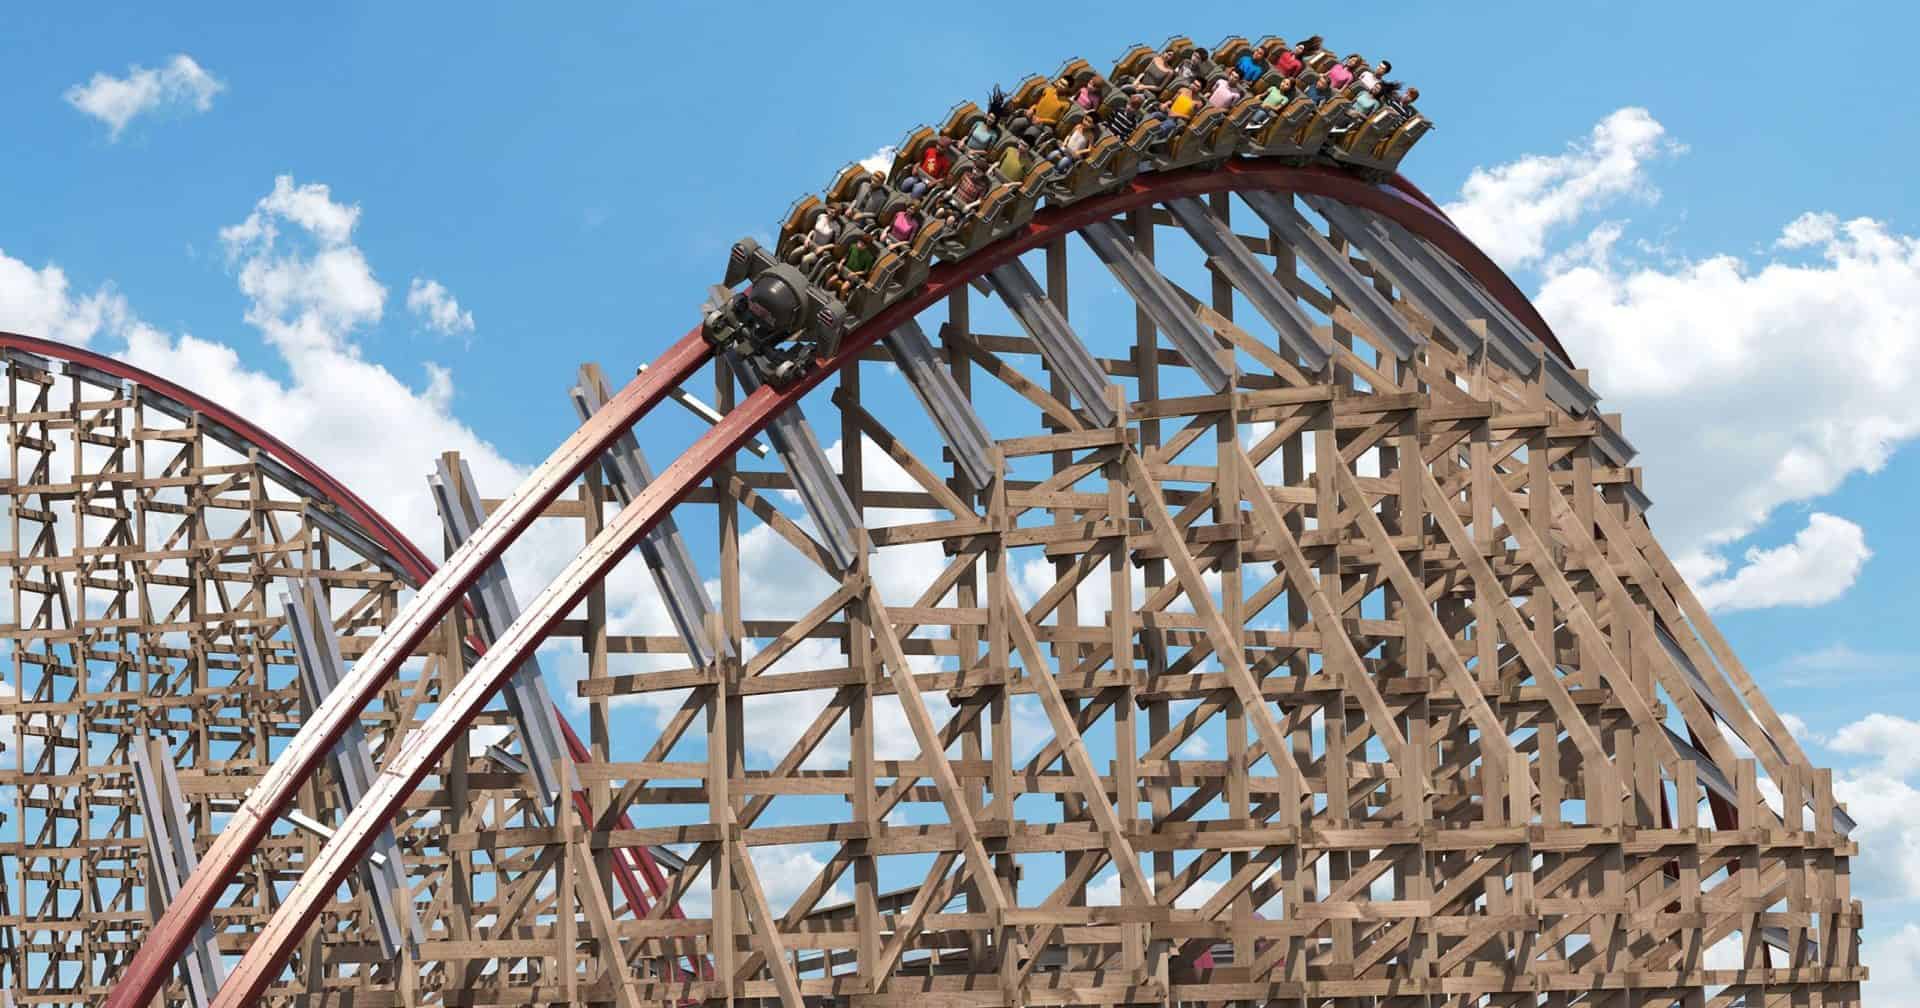 The 8 Biggest Amusement Parks In The World Best Family Escapes